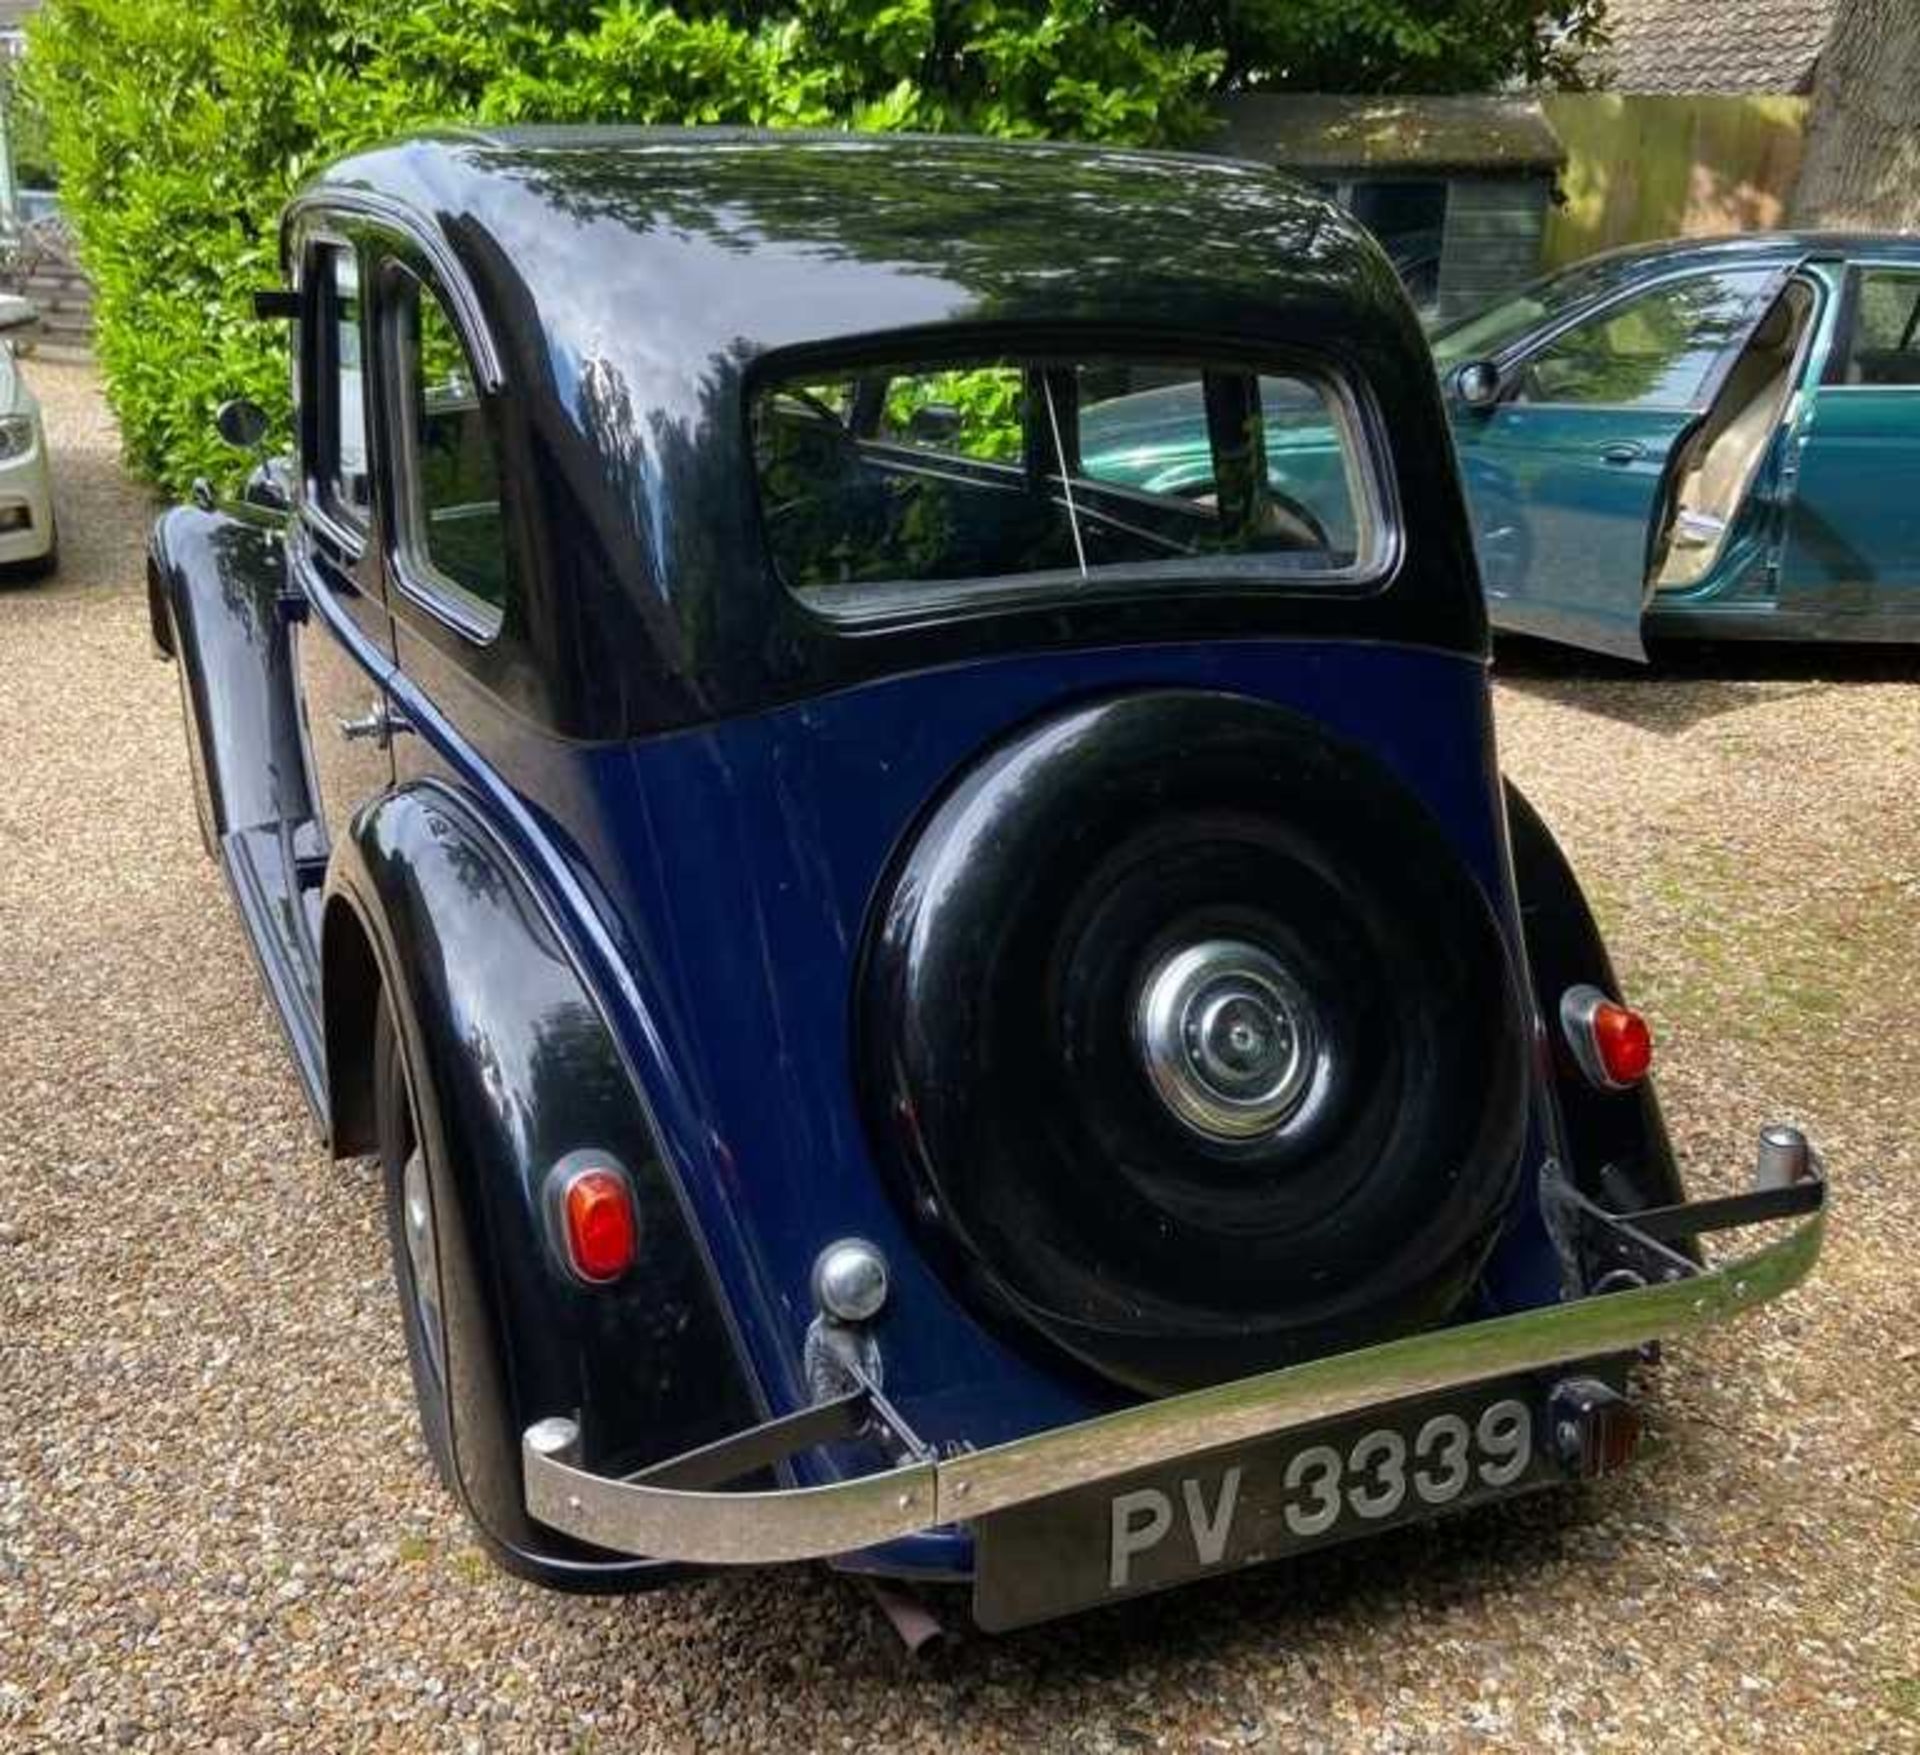 A 1936 Morris 10/4 saloon 1292cc Registration PV339 Odometer 555313 In blue and black Chassis No. - Image 4 of 13